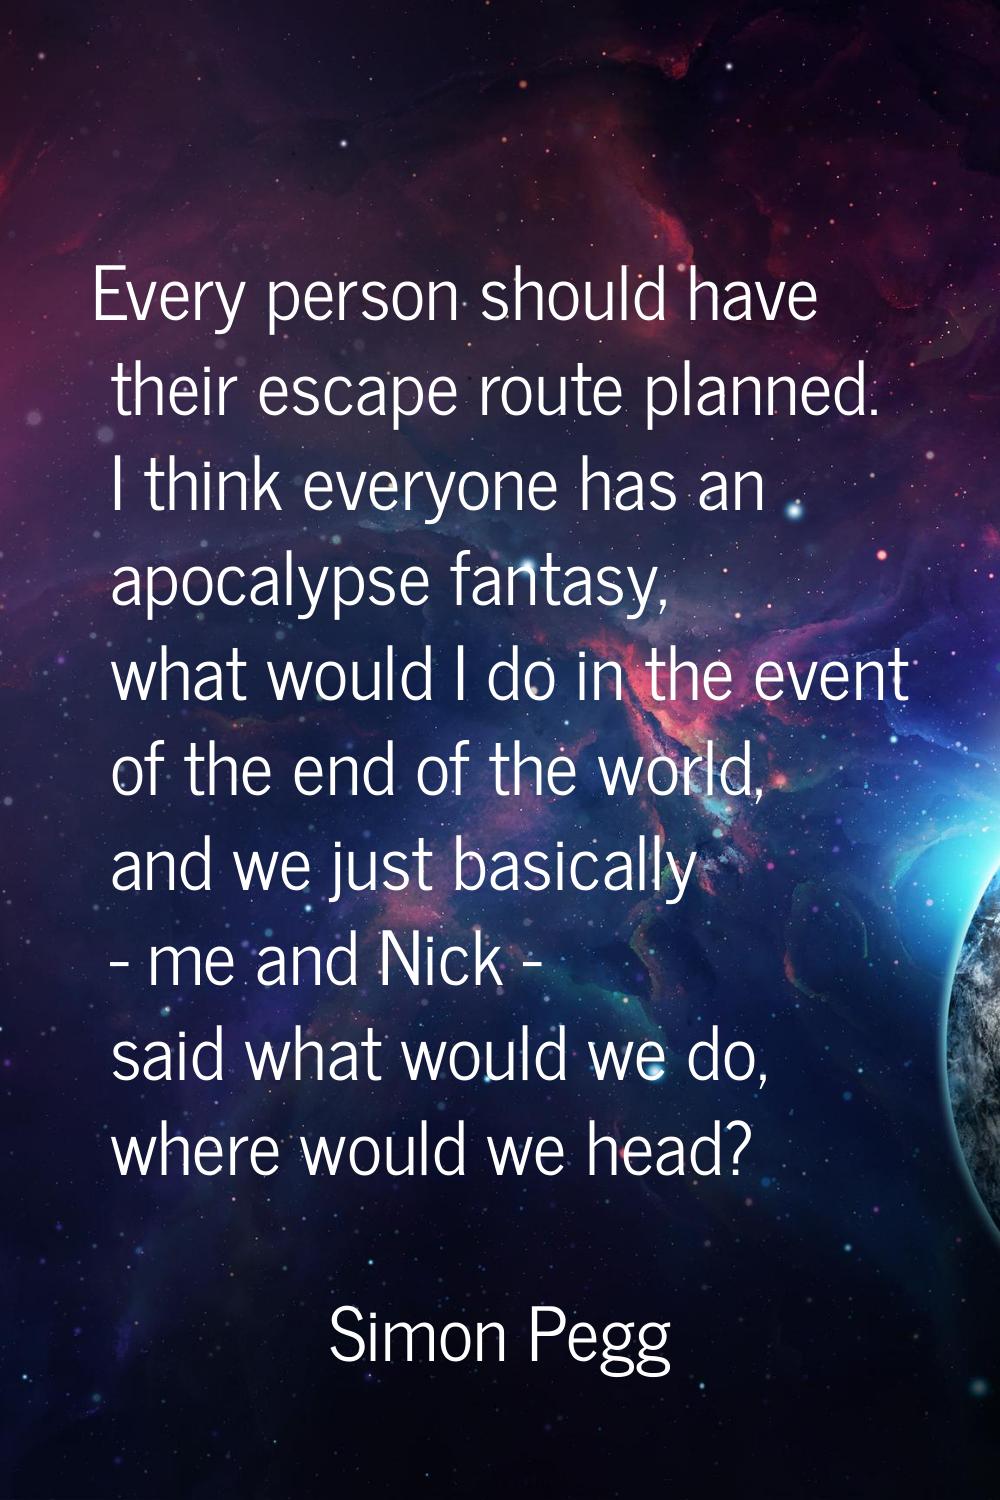 Every person should have their escape route planned. I think everyone has an apocalypse fantasy, wh